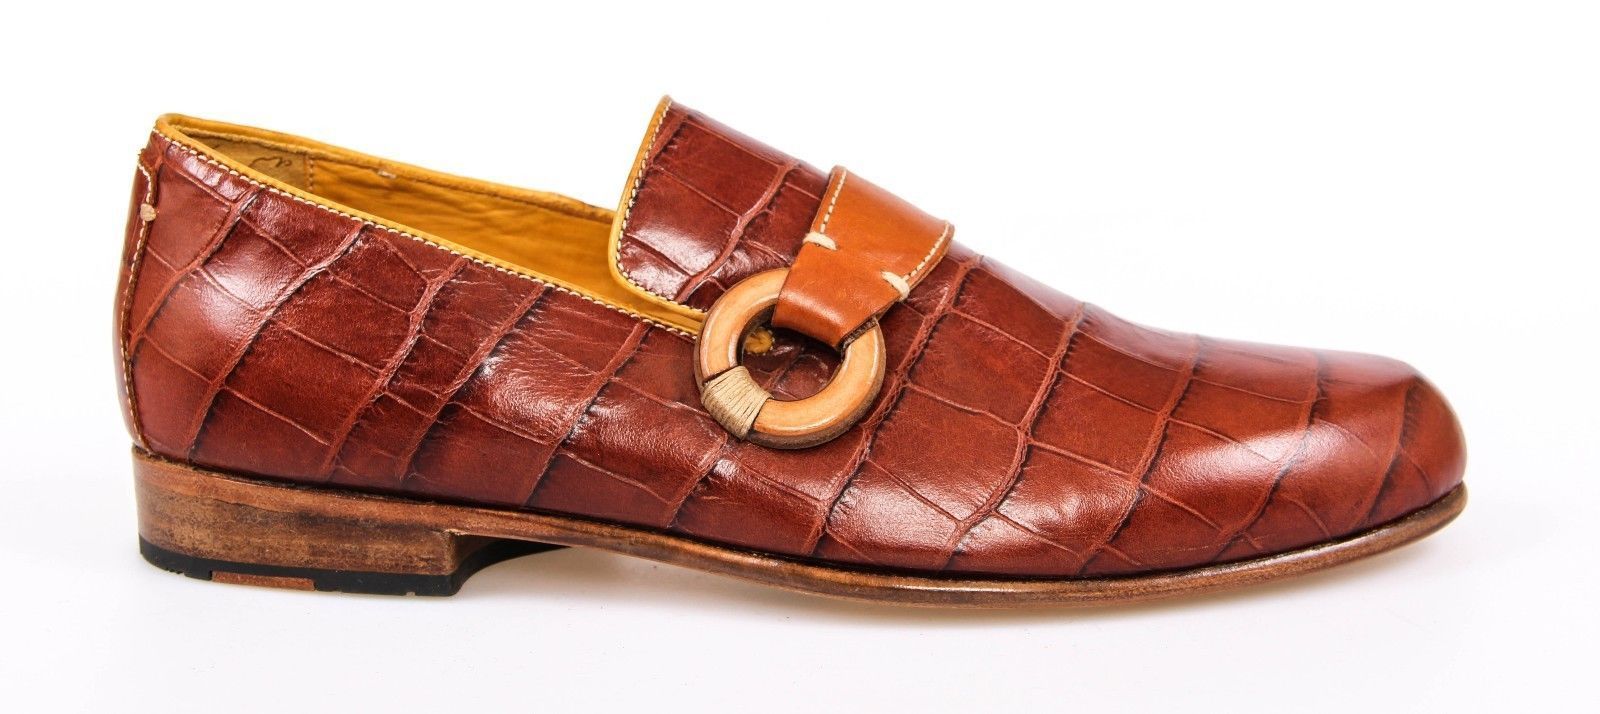 New BERLUTI Brown Crocodile Print Leather Loafers Shoes Size 8 $3500 | eBay